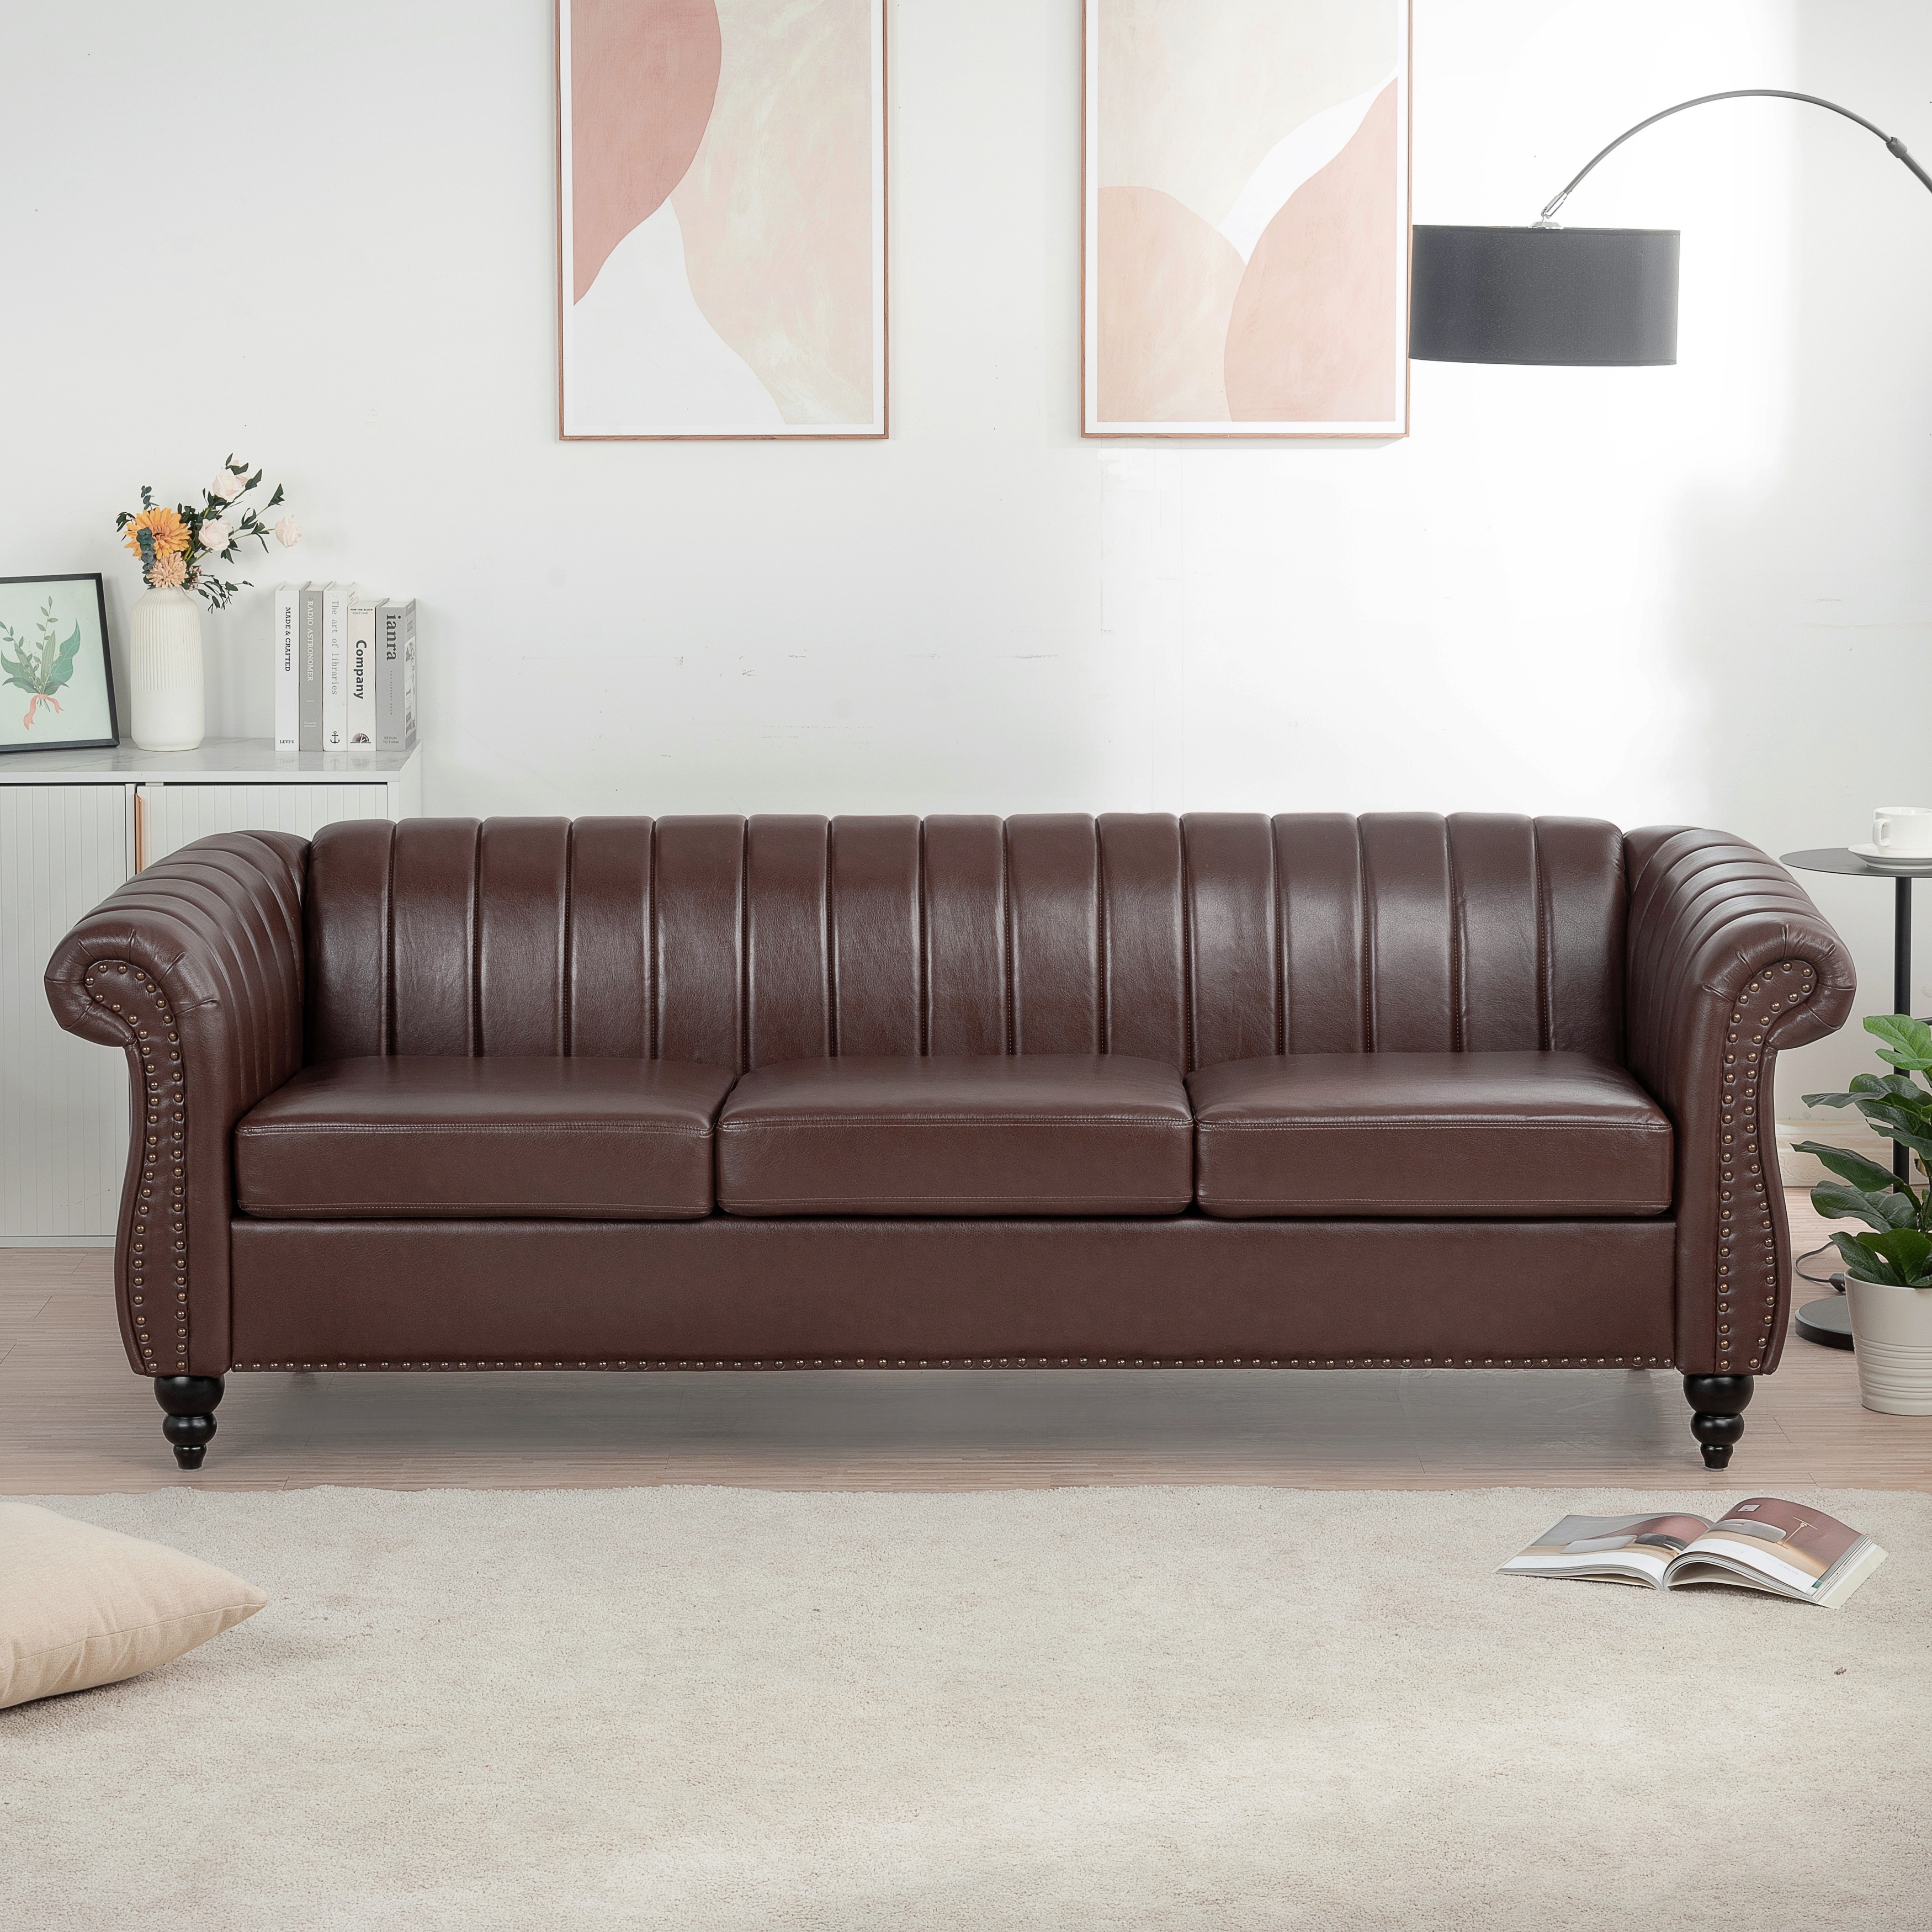 Modular Cushions Sofa Support for Sagging Cushions Removable Seat